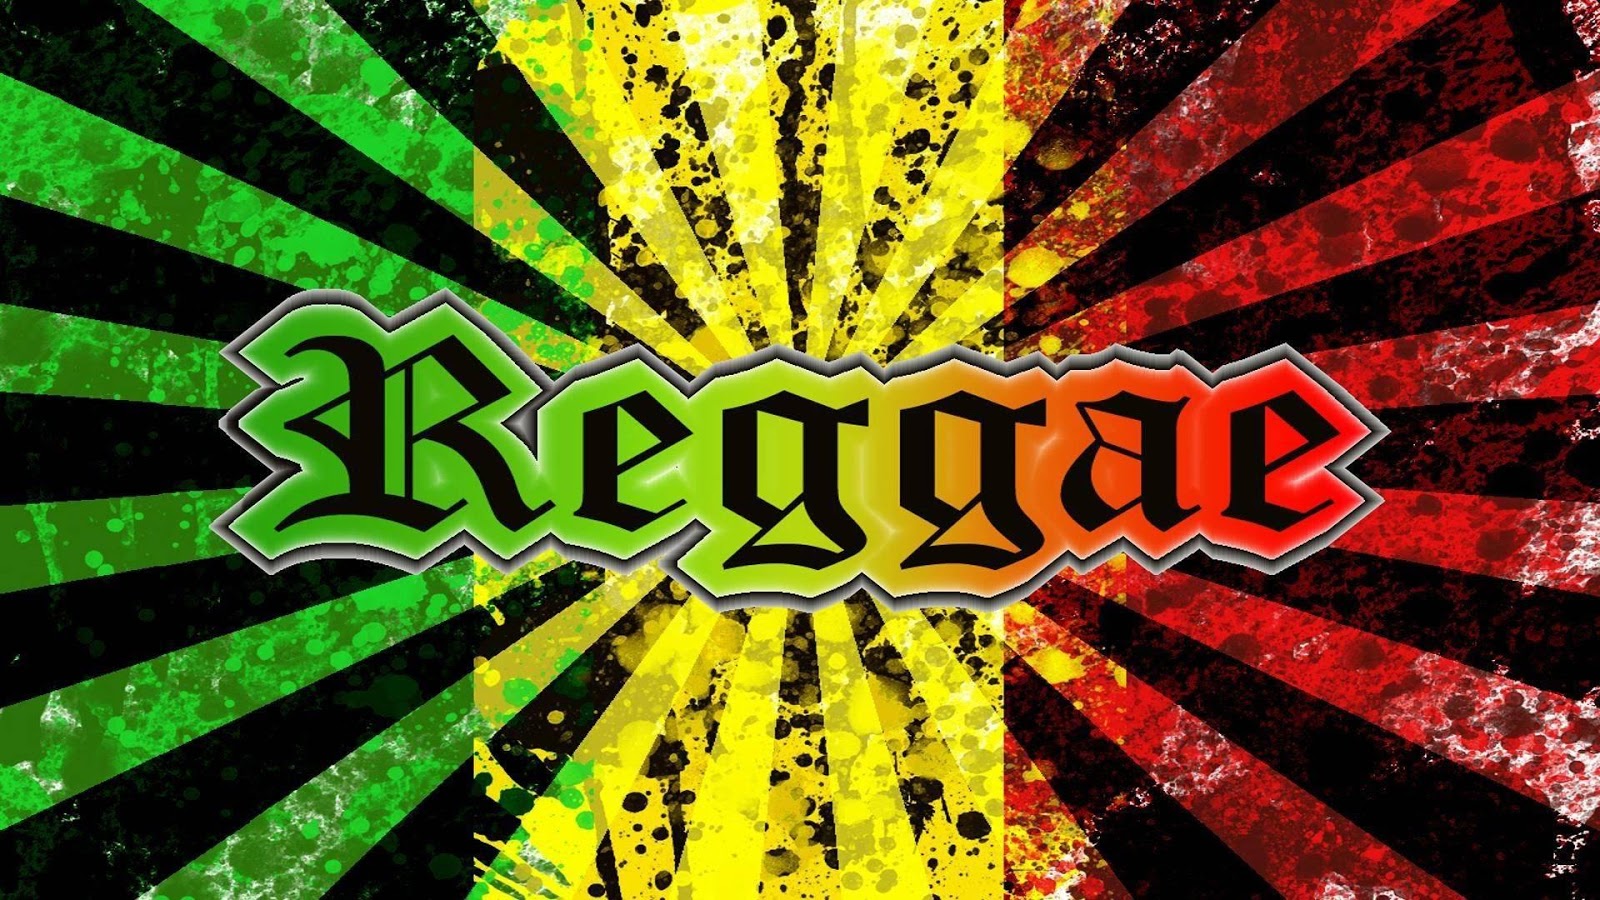 Reggae Live Wallpaper HD - Android Apps on Google Play